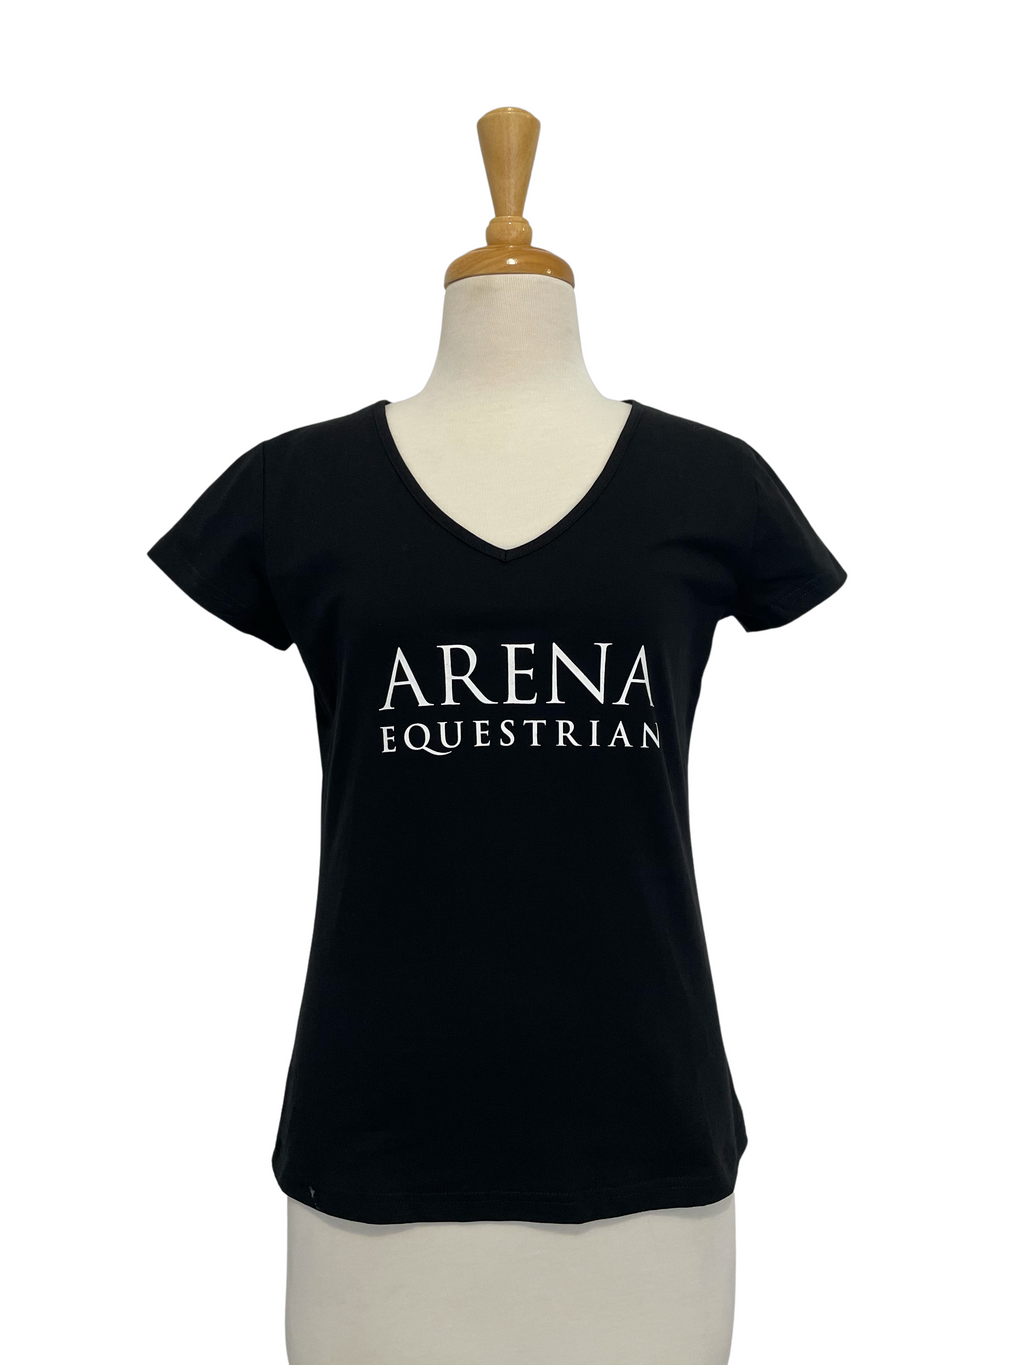 Arena Equestrian Tee